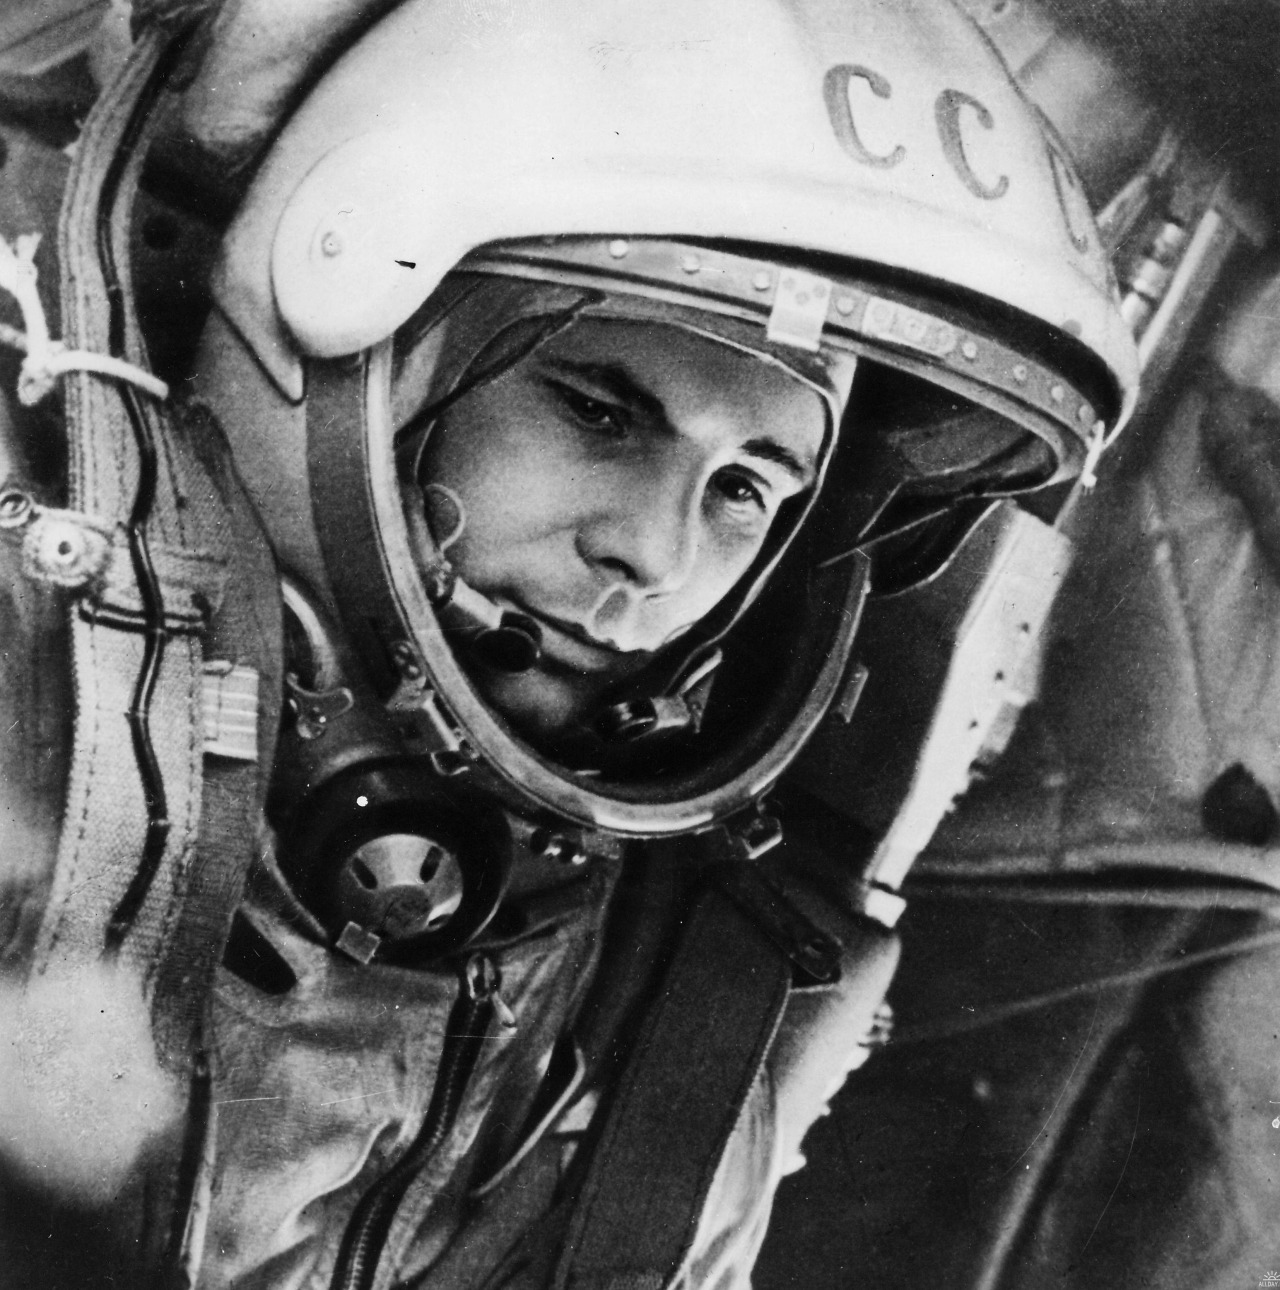 humanoidhistory:
““Orbiting Earth in the spaceship, I saw how beautiful our planet is. People, let us preserve and increase this beauty, not destroy it!”
—Yuri Gagarin
”